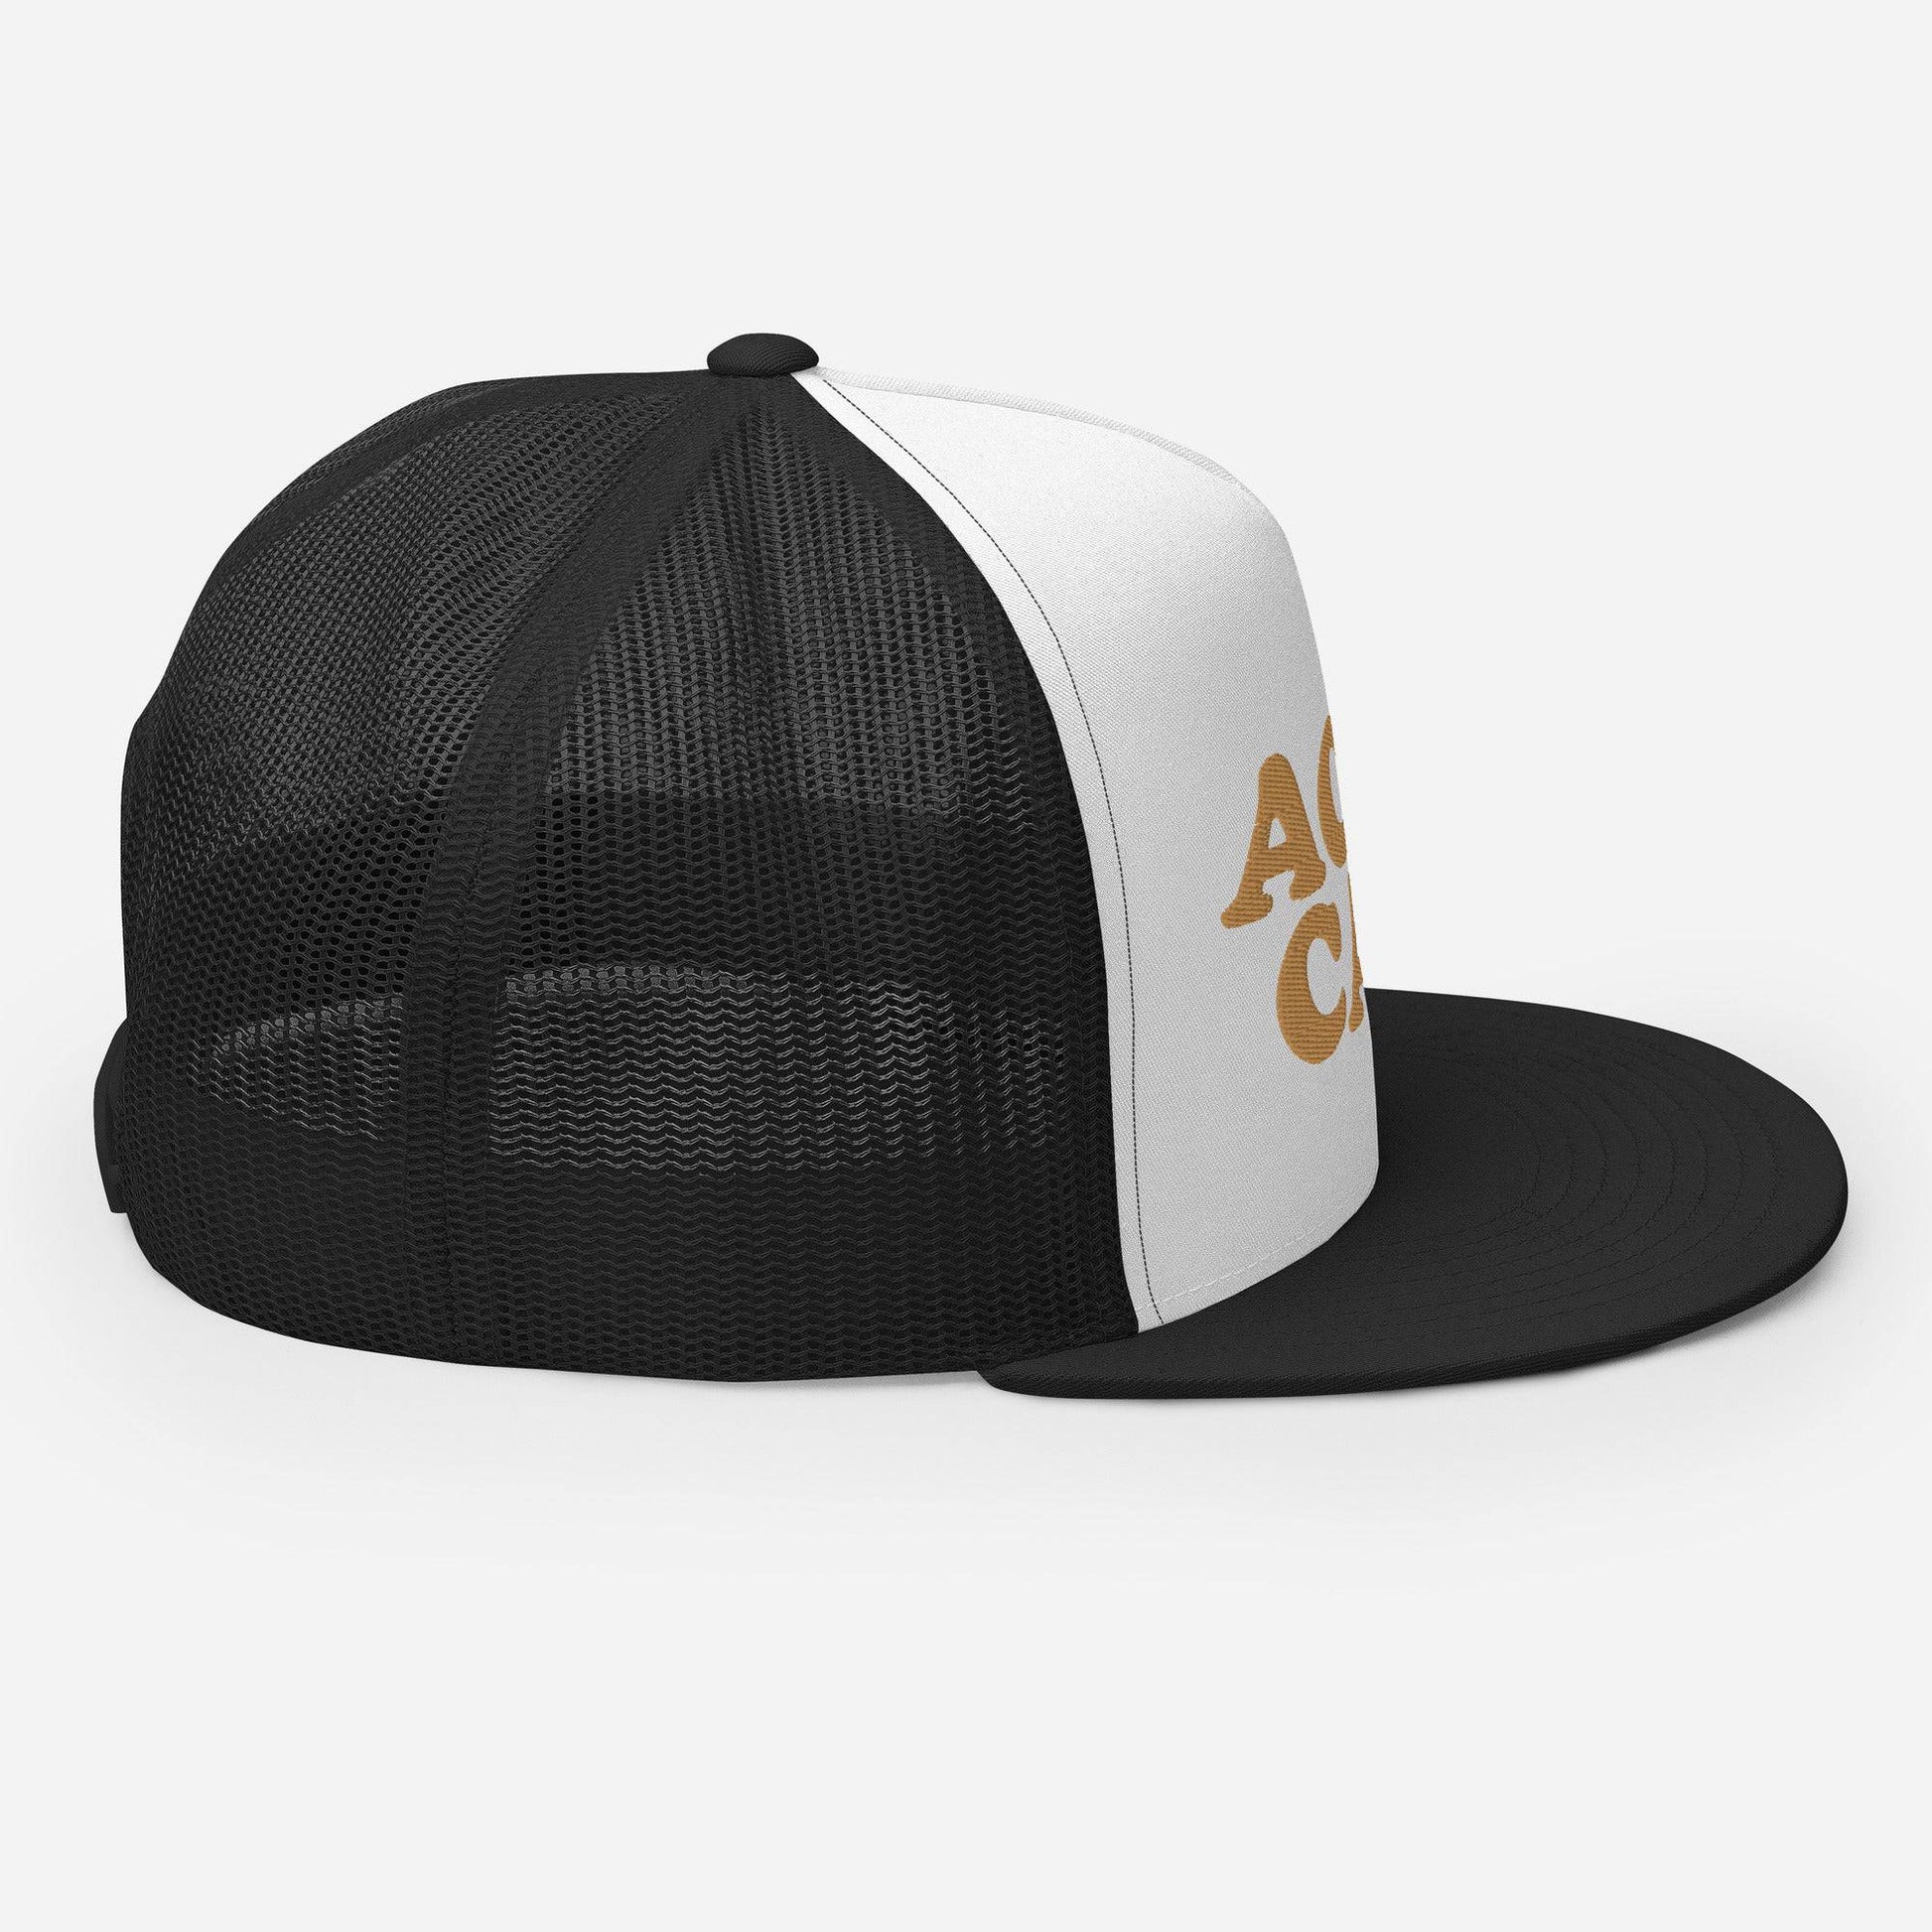 Acid Cap Logo-Embroidered and Mesh Trucker Hat - Pixel Gallery